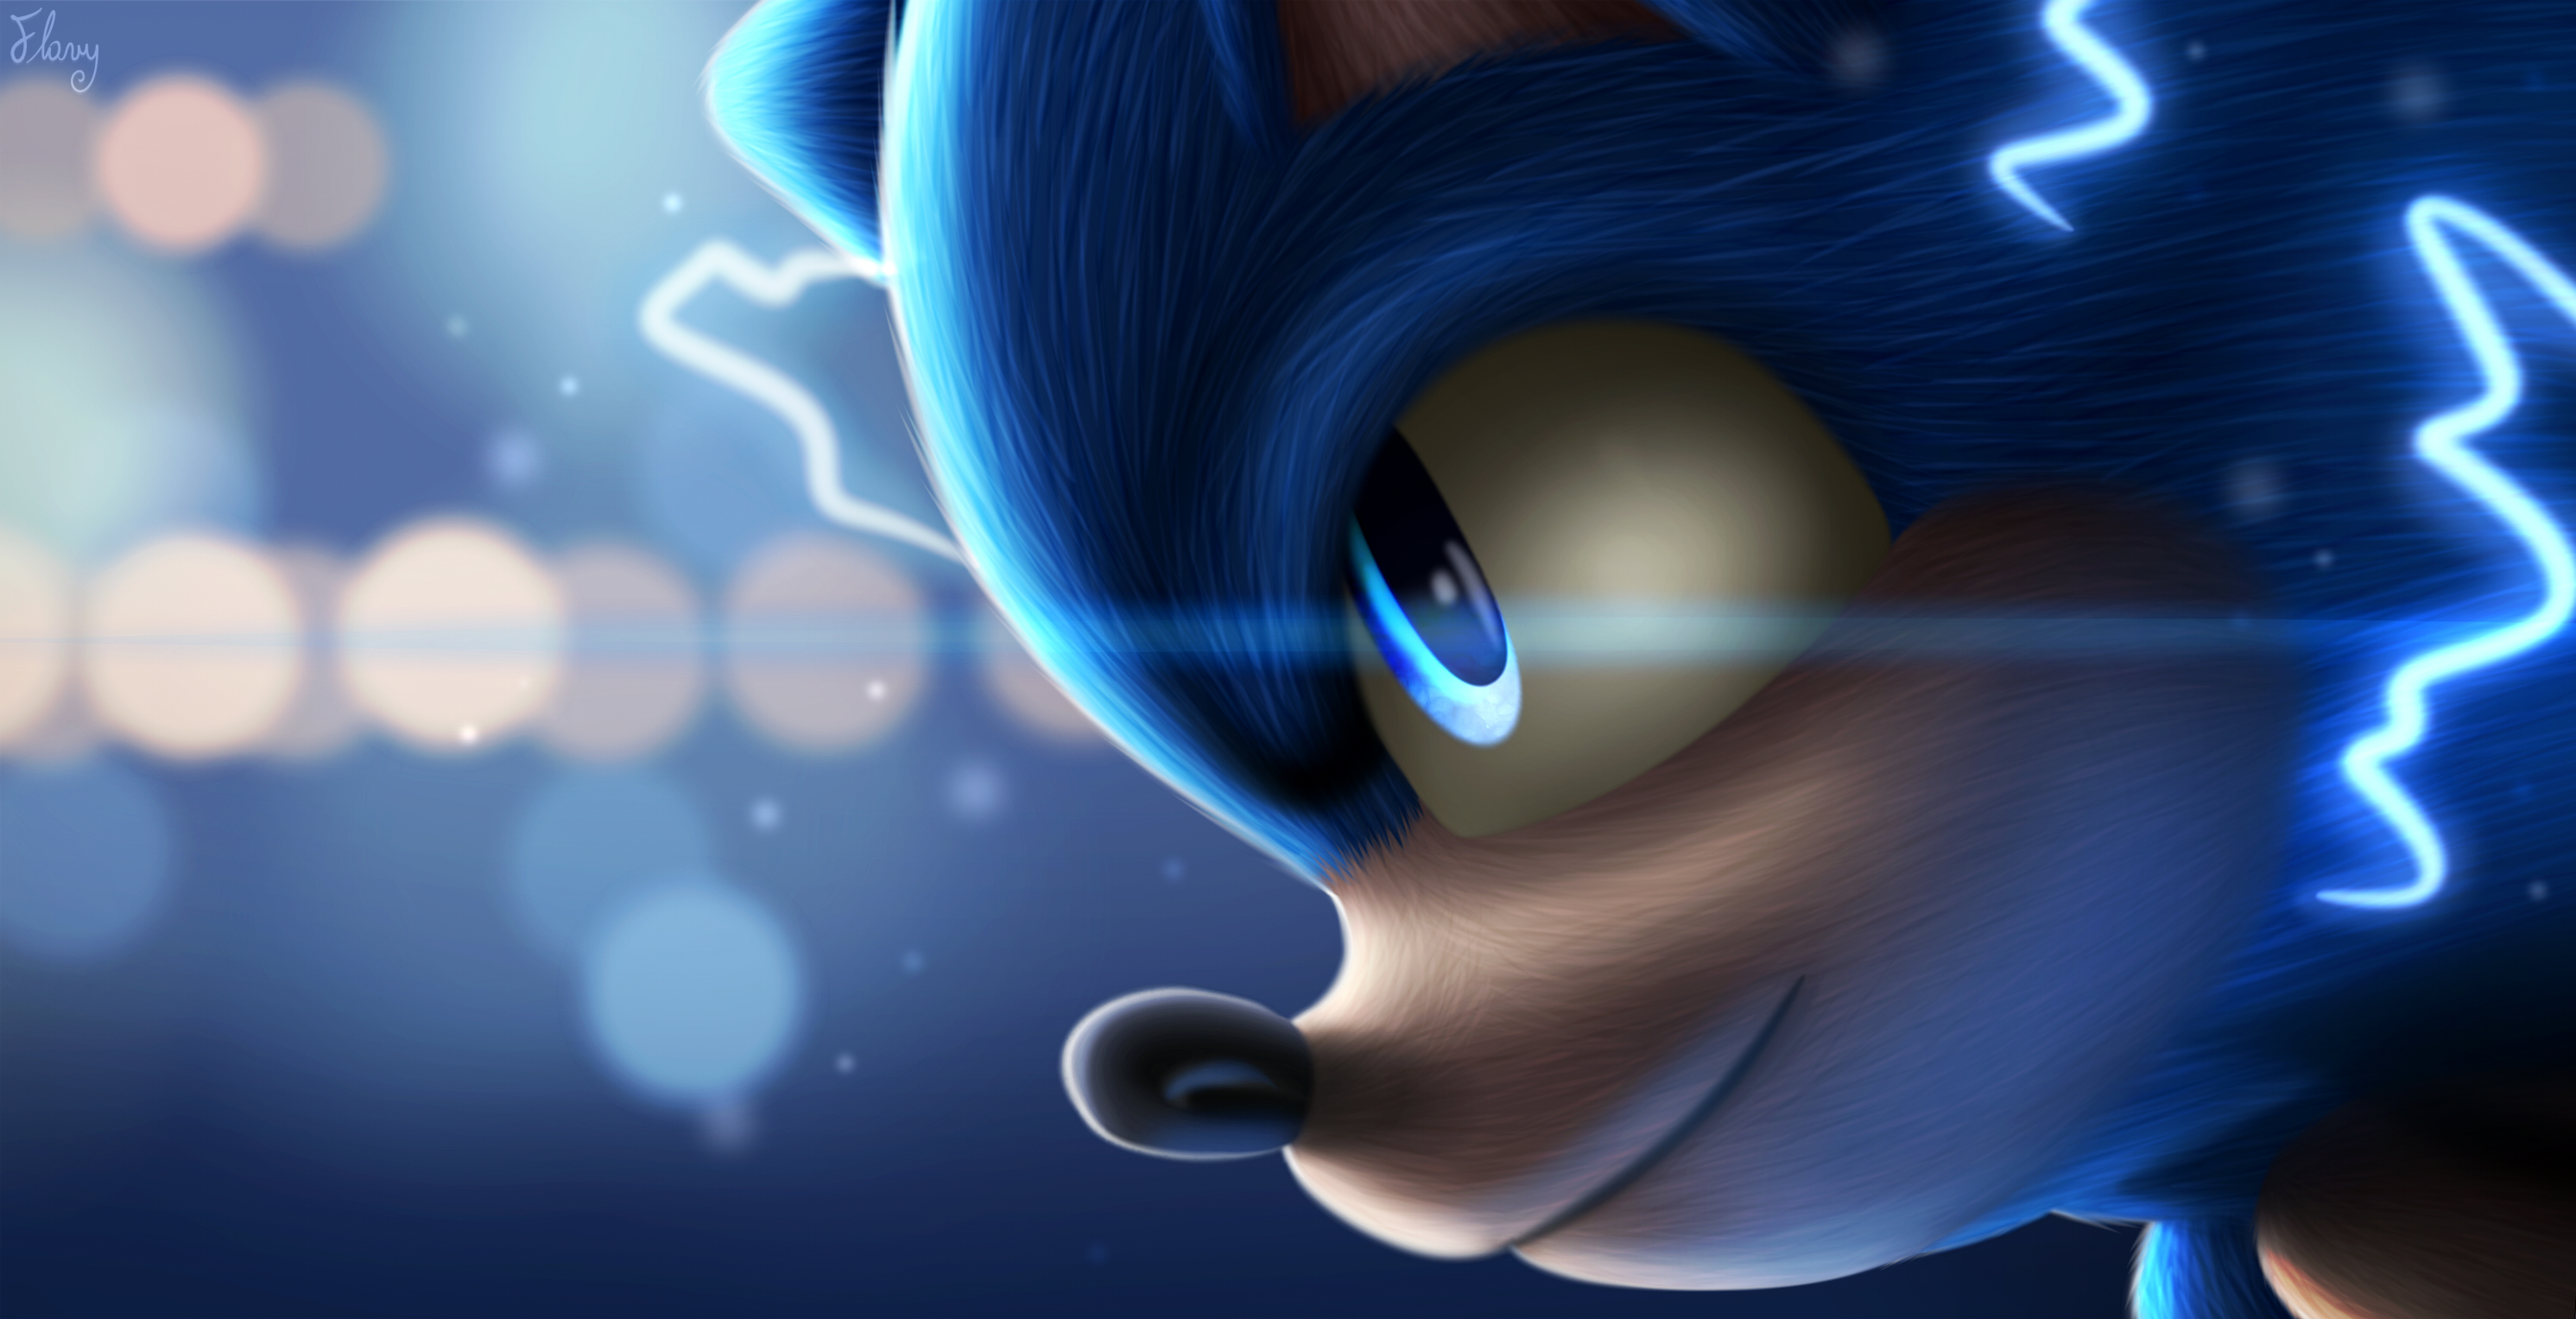 3x568 Sonic The Hedgehog Art 3x568 Resolution Wallpaper Hd Movies 4k Wallpapers Images Photos And Background